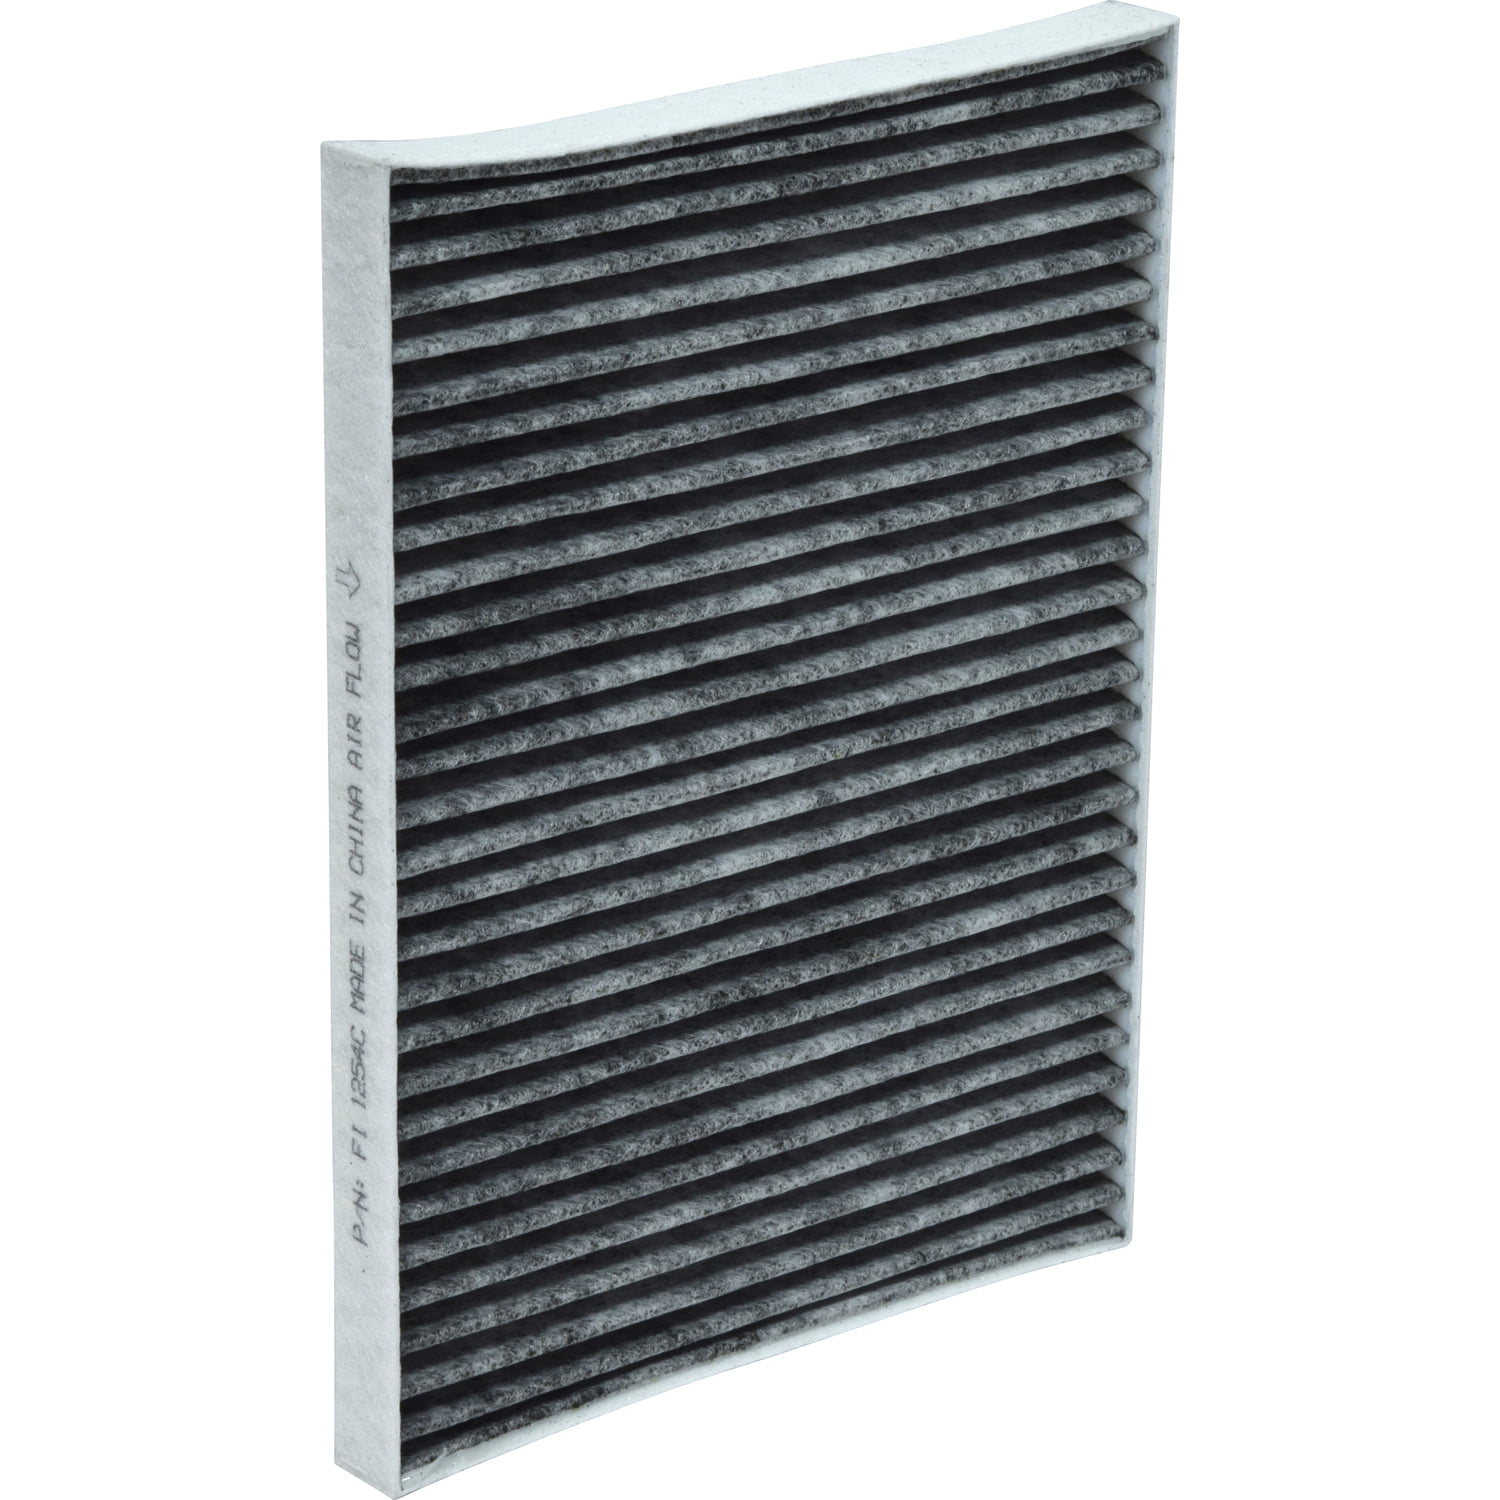 2017 Acadia Limited PG Cabin Air Filter PC6205C|Fits 2008-17 Buick Enclave 2009-17 Chevrolet Traverse 2007-10 Saturn Outlook 2007-16 GMC Acadia